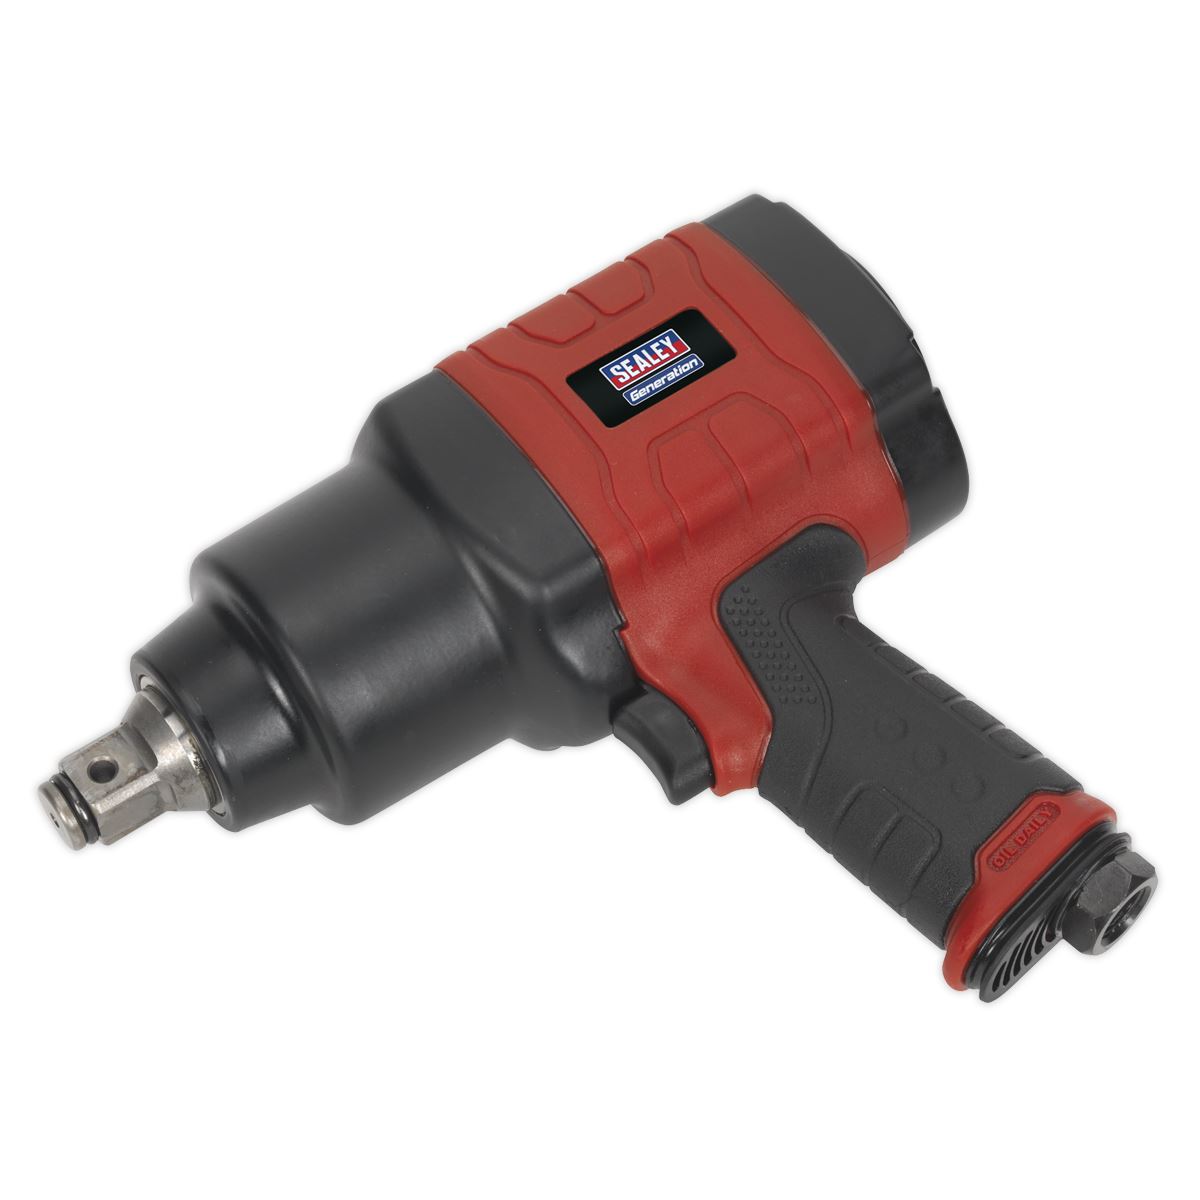 Generation Composite Air Impact Wrench 3/4"Sq Drive - Twin Hammer